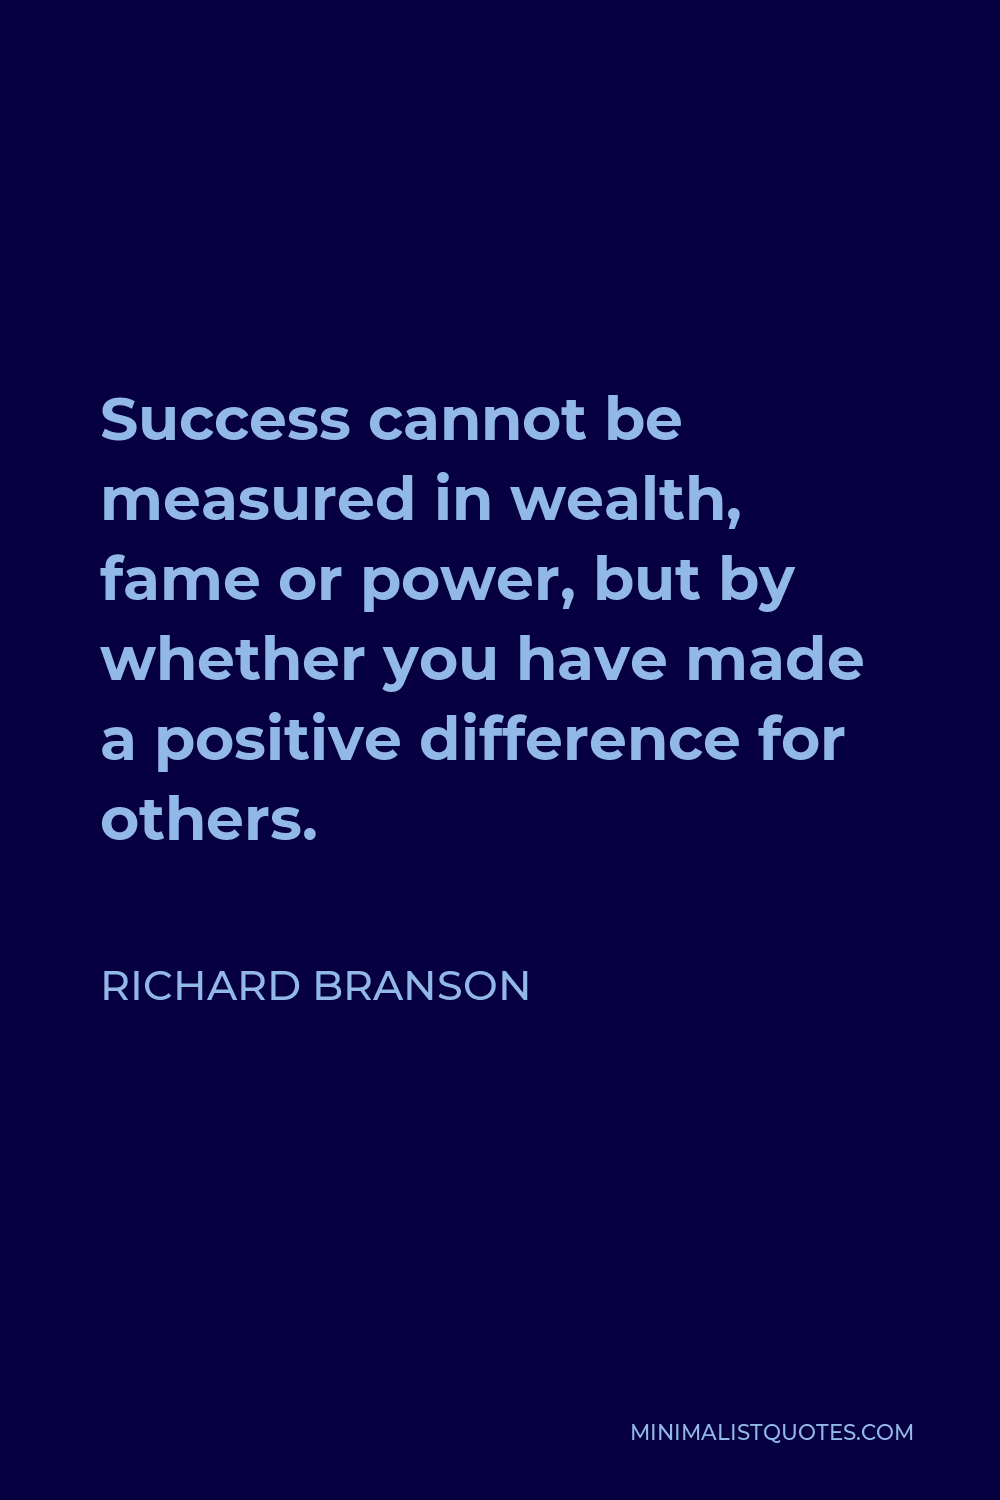 Richard Branson Quote - Success cannot be measured in wealth, fame or power, but by whether you have made a positive difference for others.